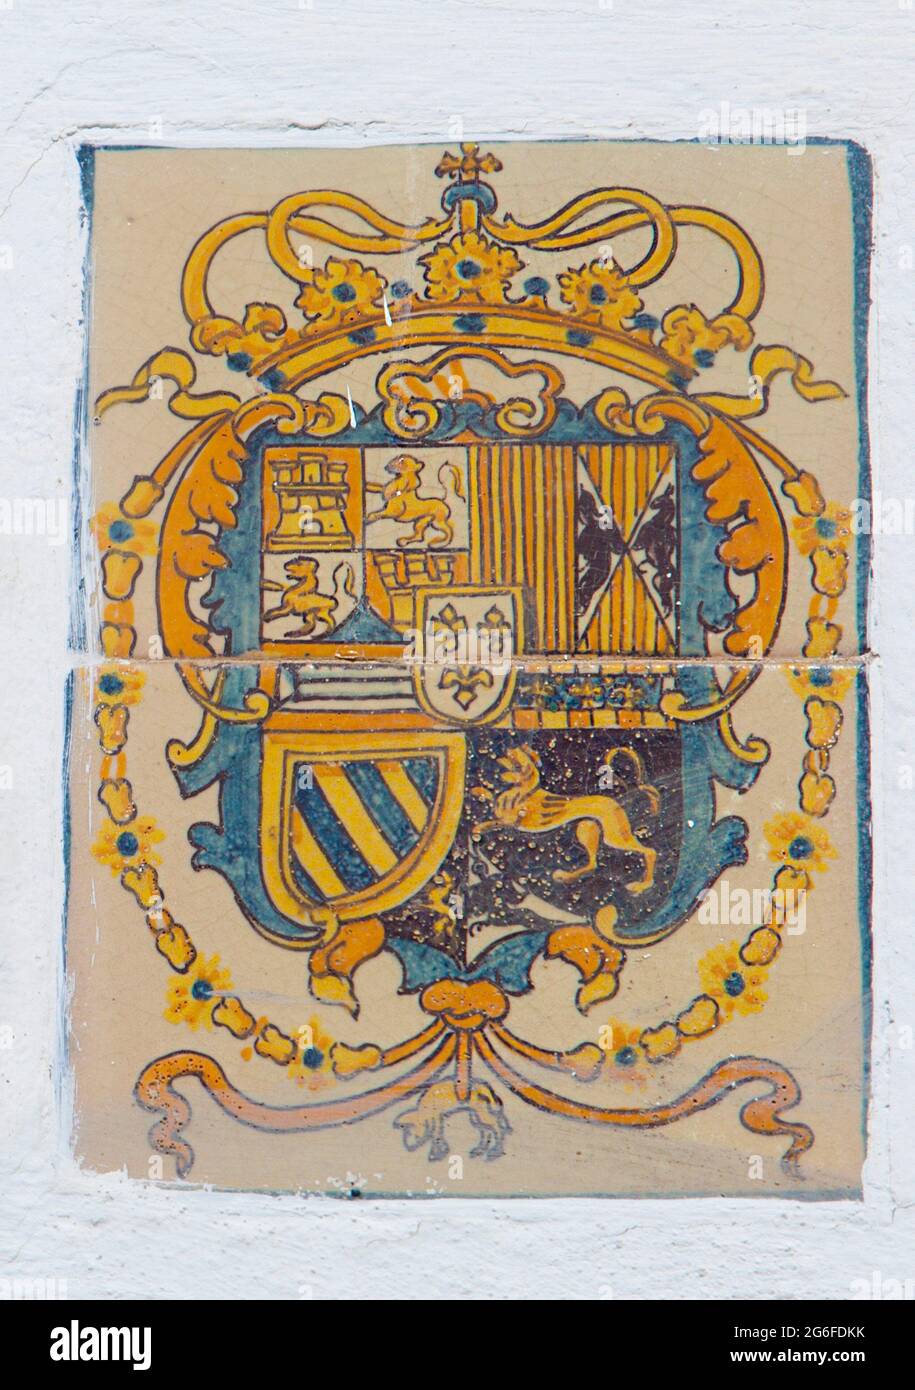 Royal Alcazars of Seville. Coat of arms glazed tiled from Patio de Banderas Section. Stock Photo